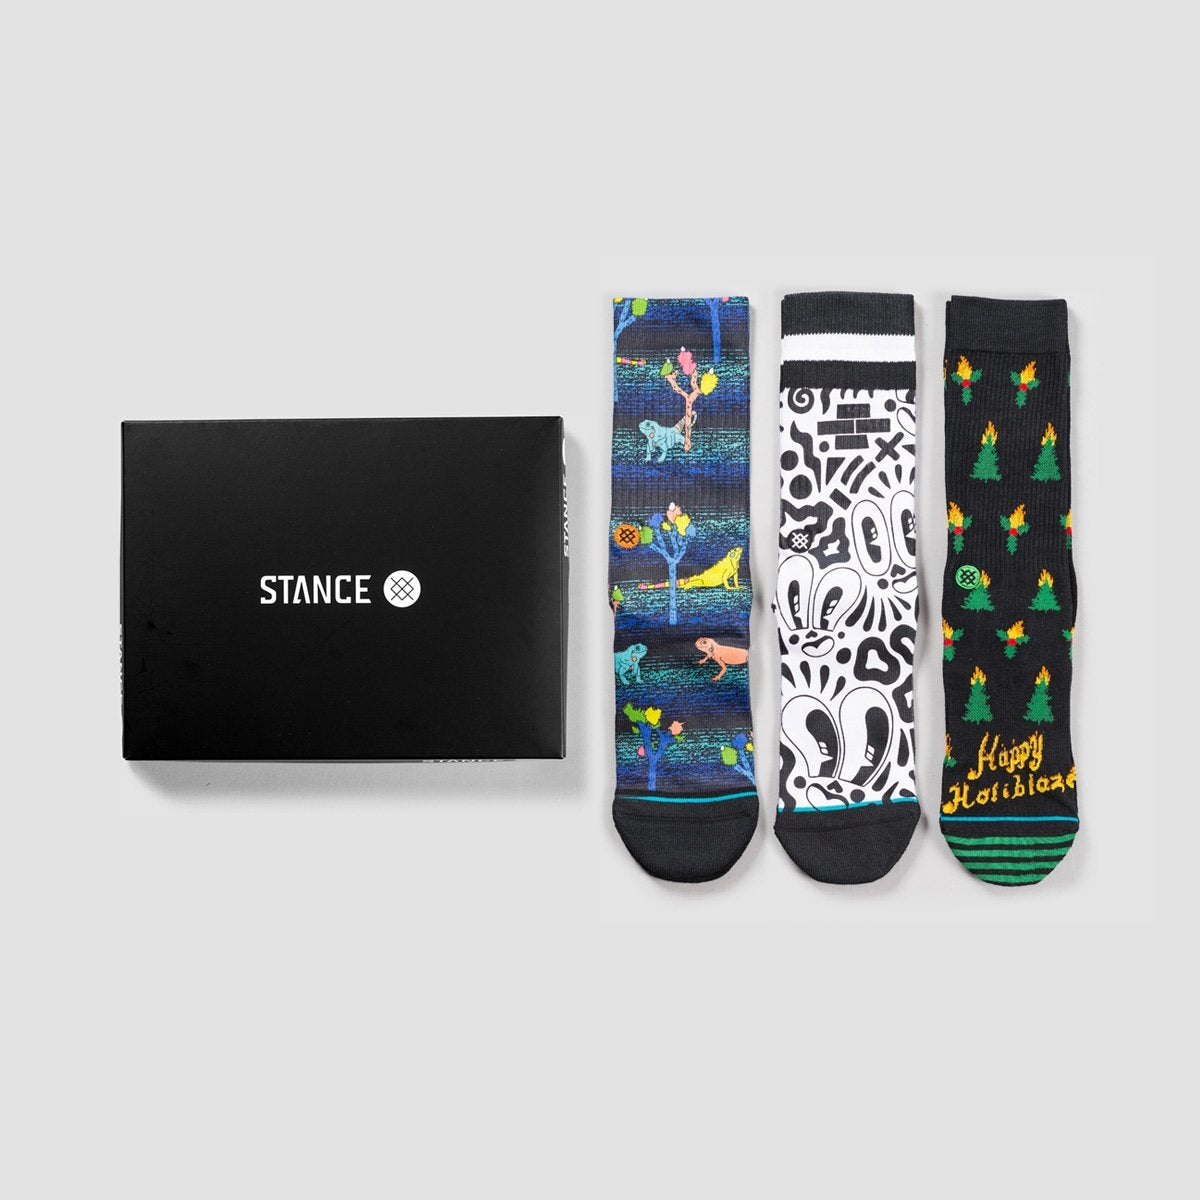 Stance Foundation 1 Socks 3 Pack Box Set Various - Accessories